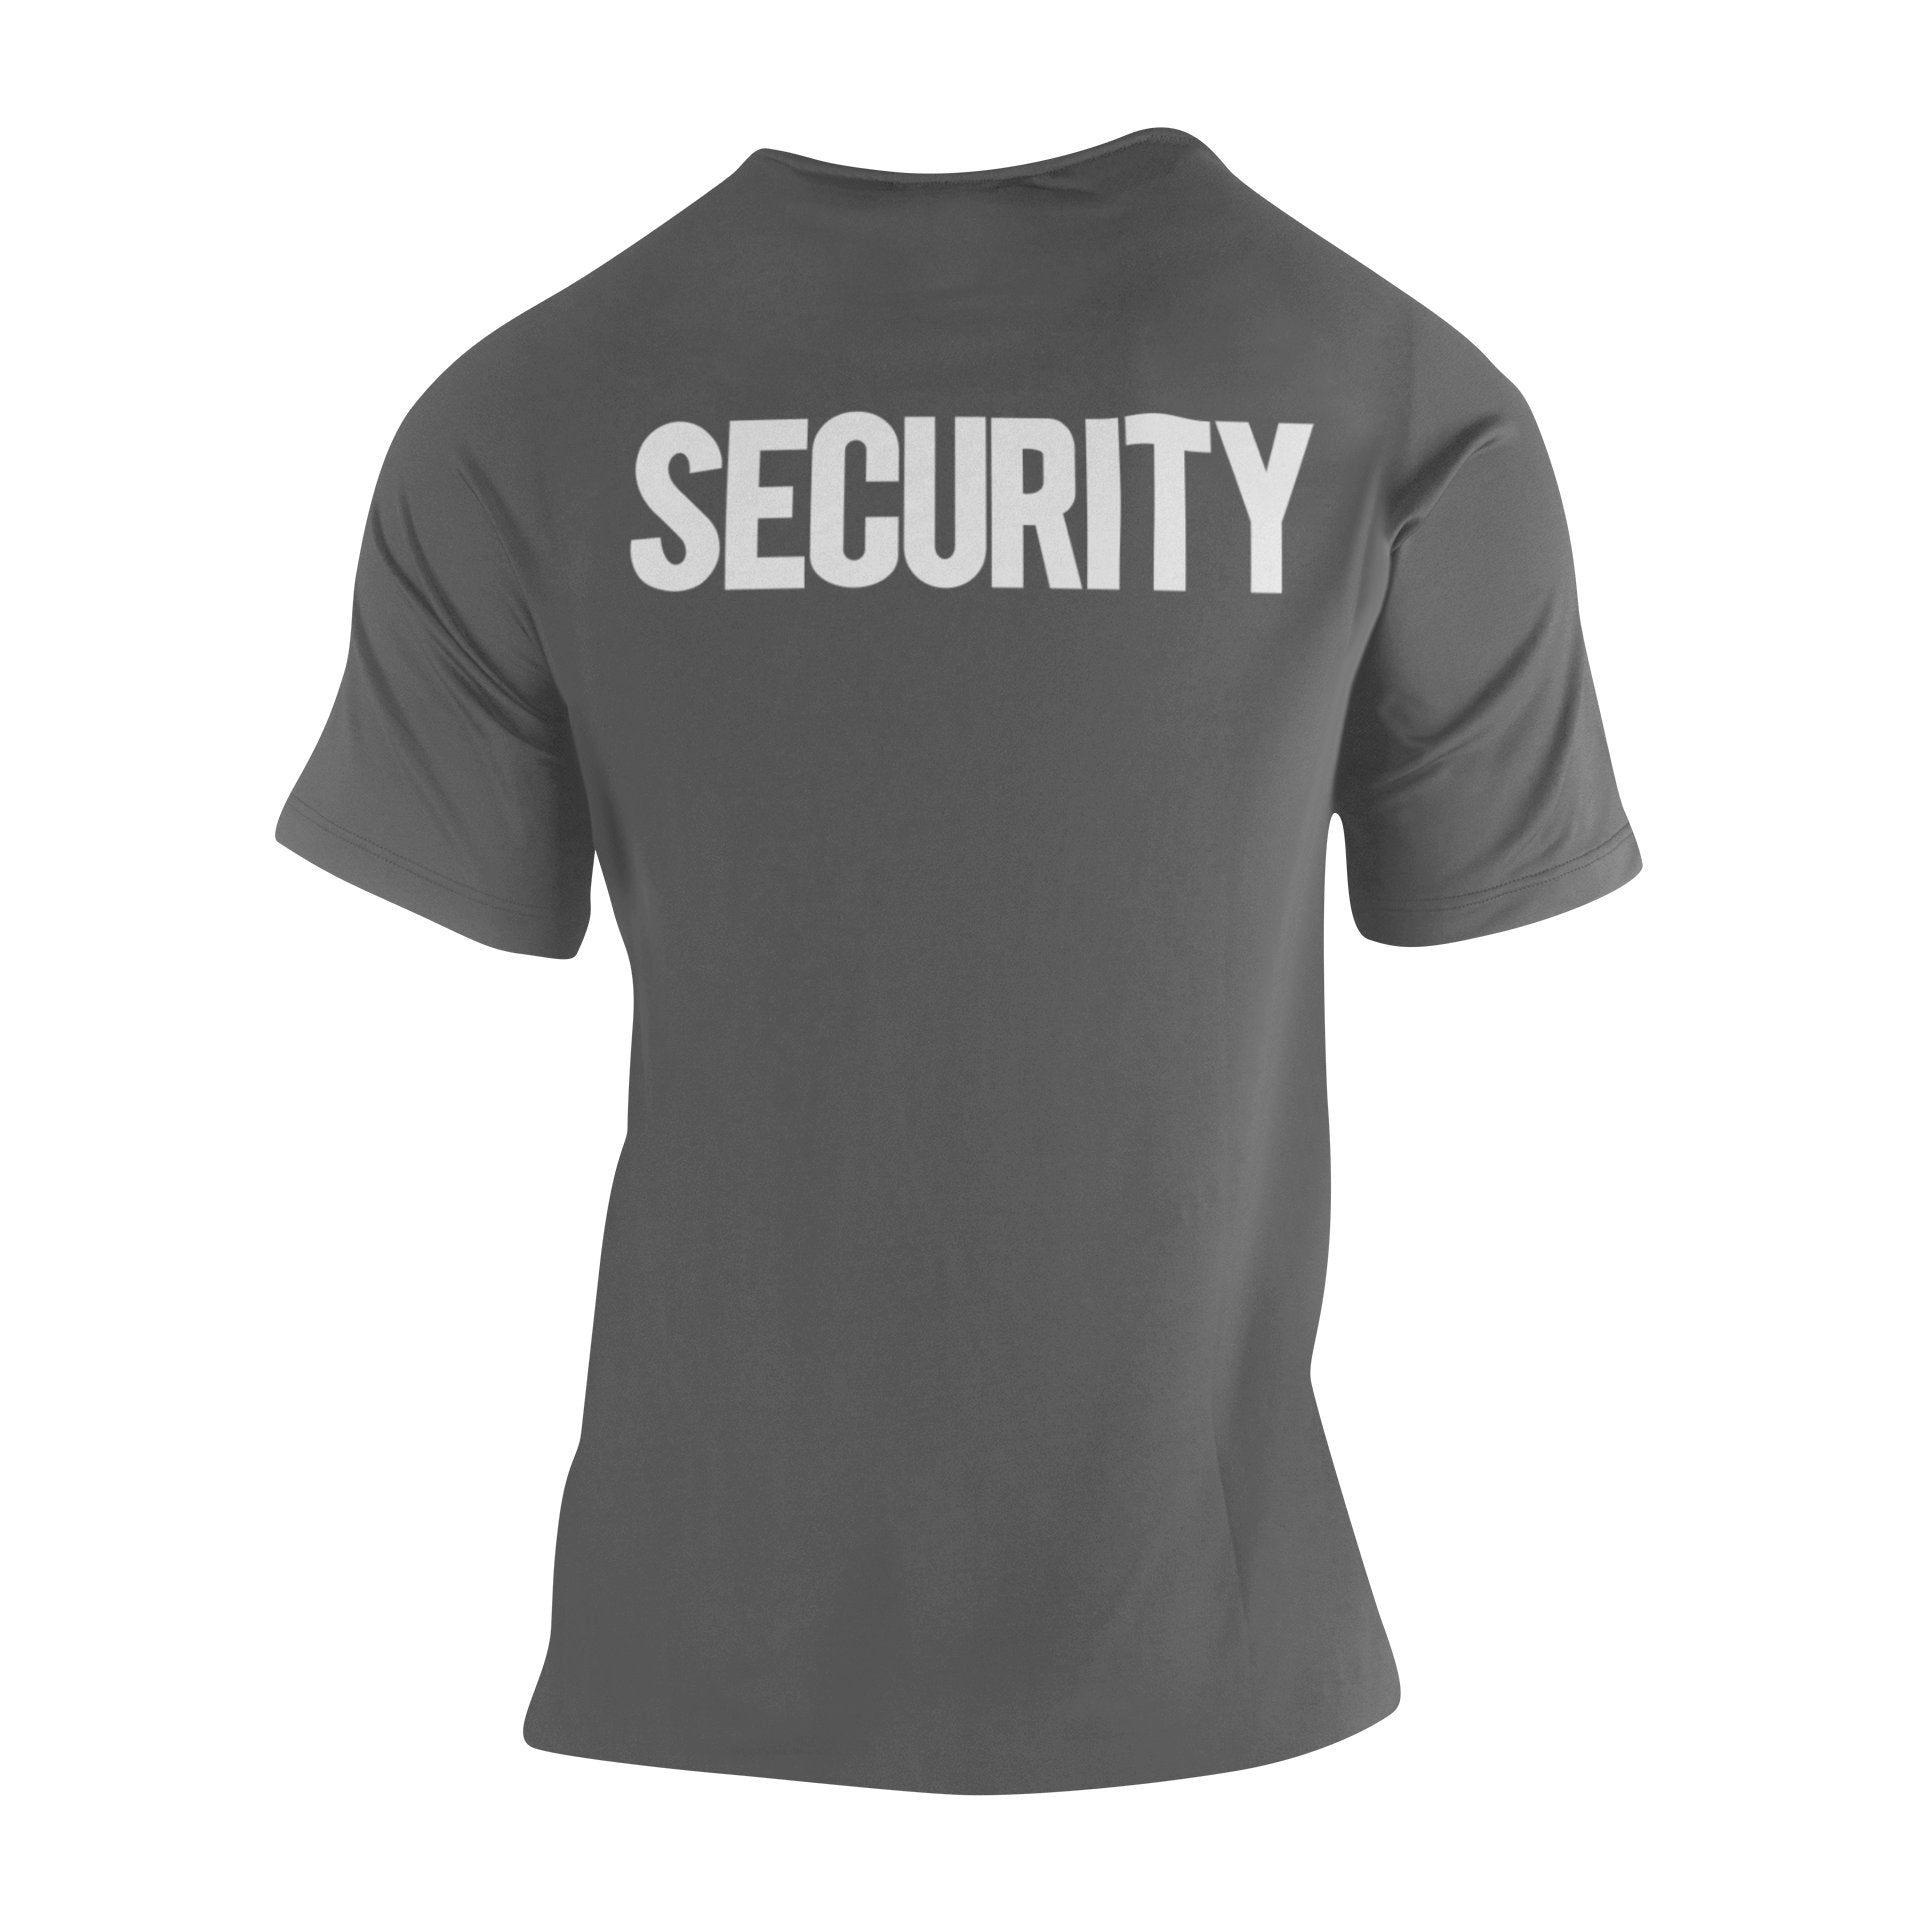 Men's Security Tee (Solid Design, Front & Back Print, Charcoal & White)